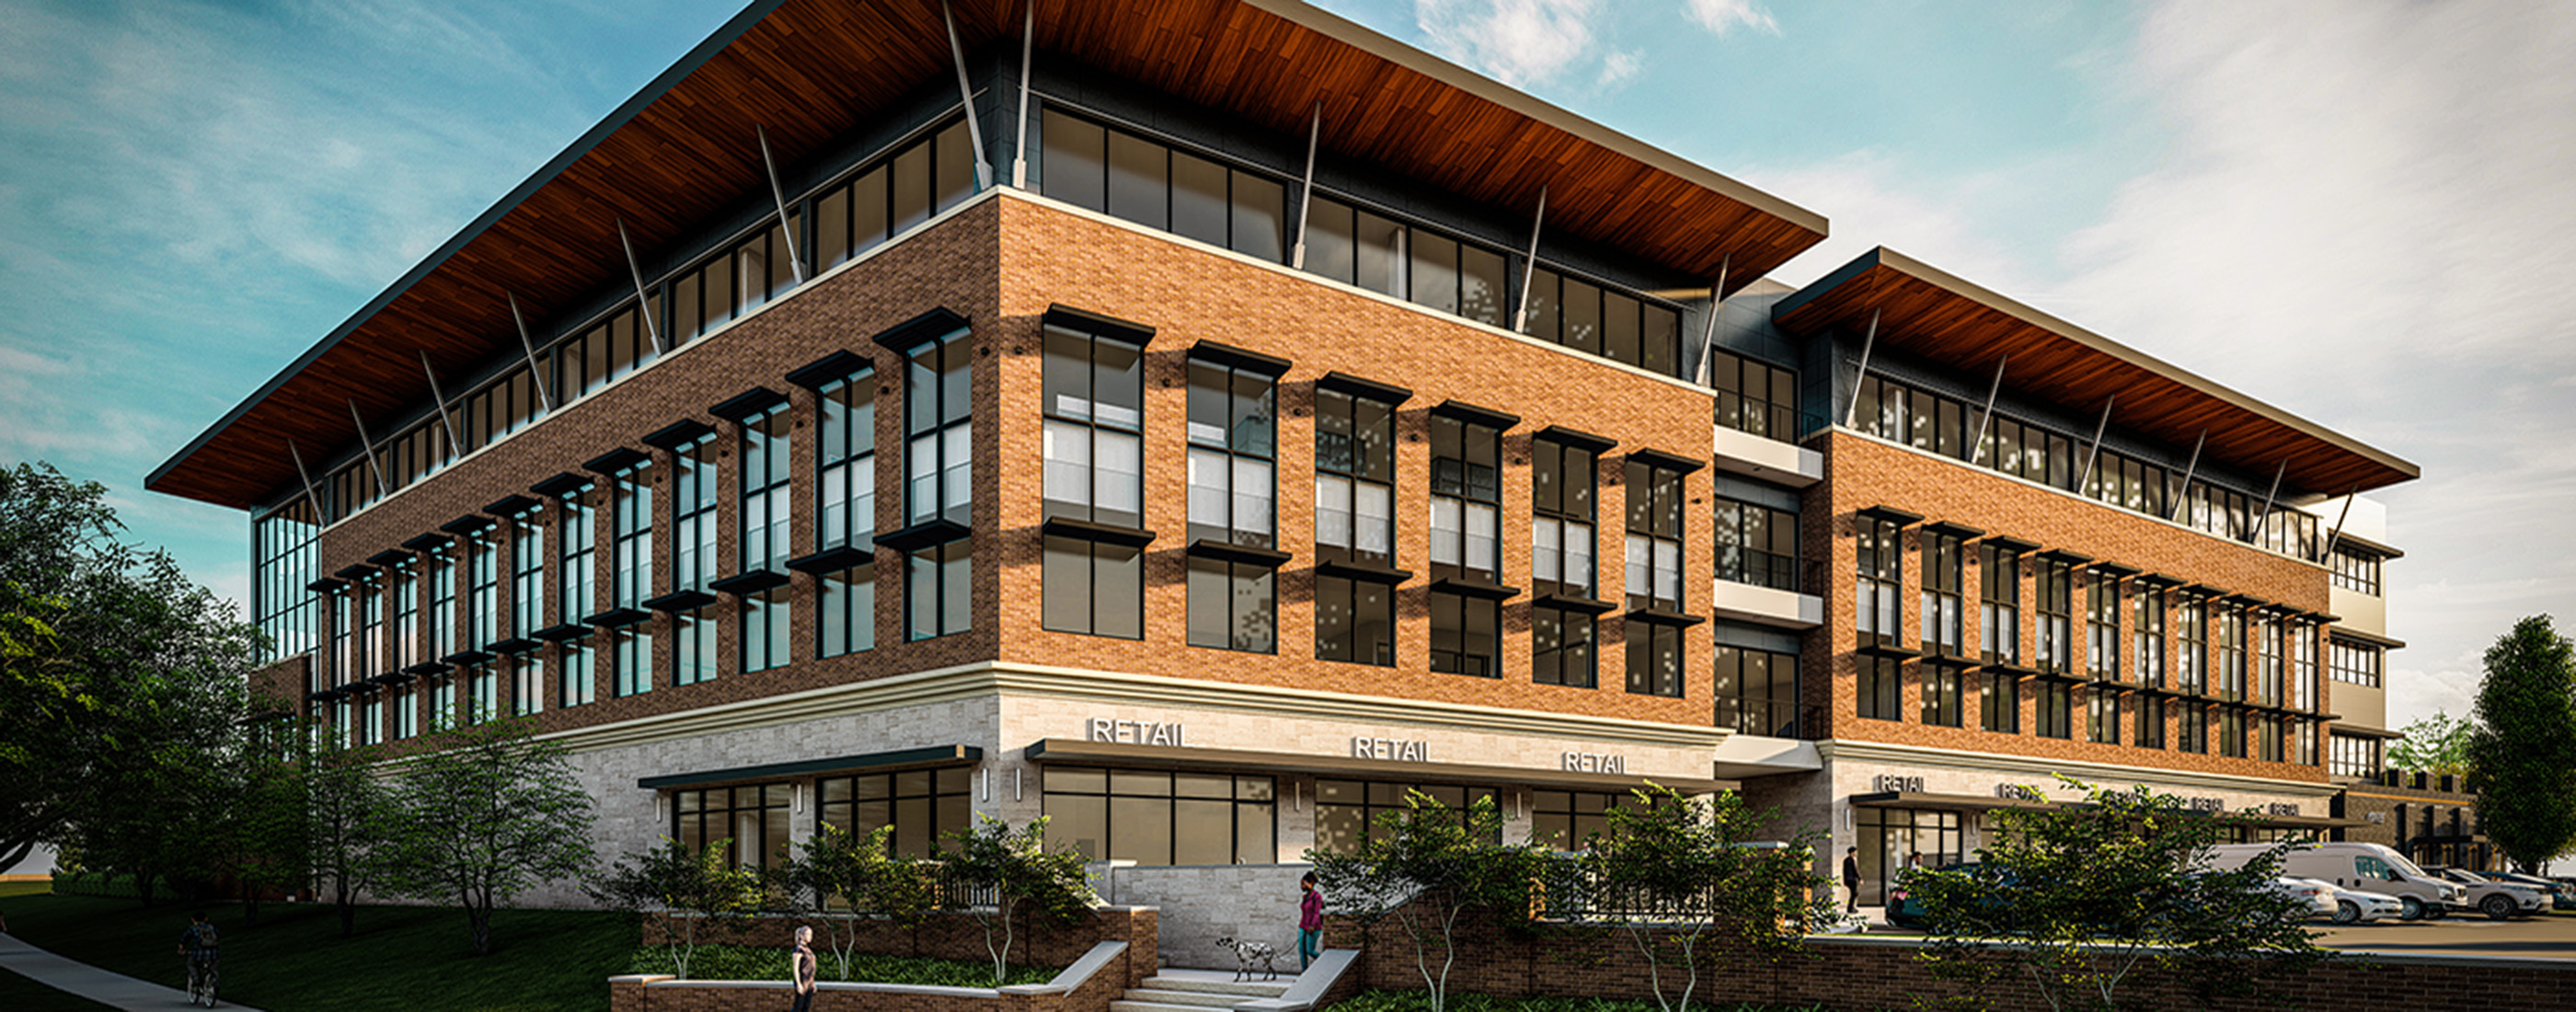 Rendering of a building within the Alliance Place development